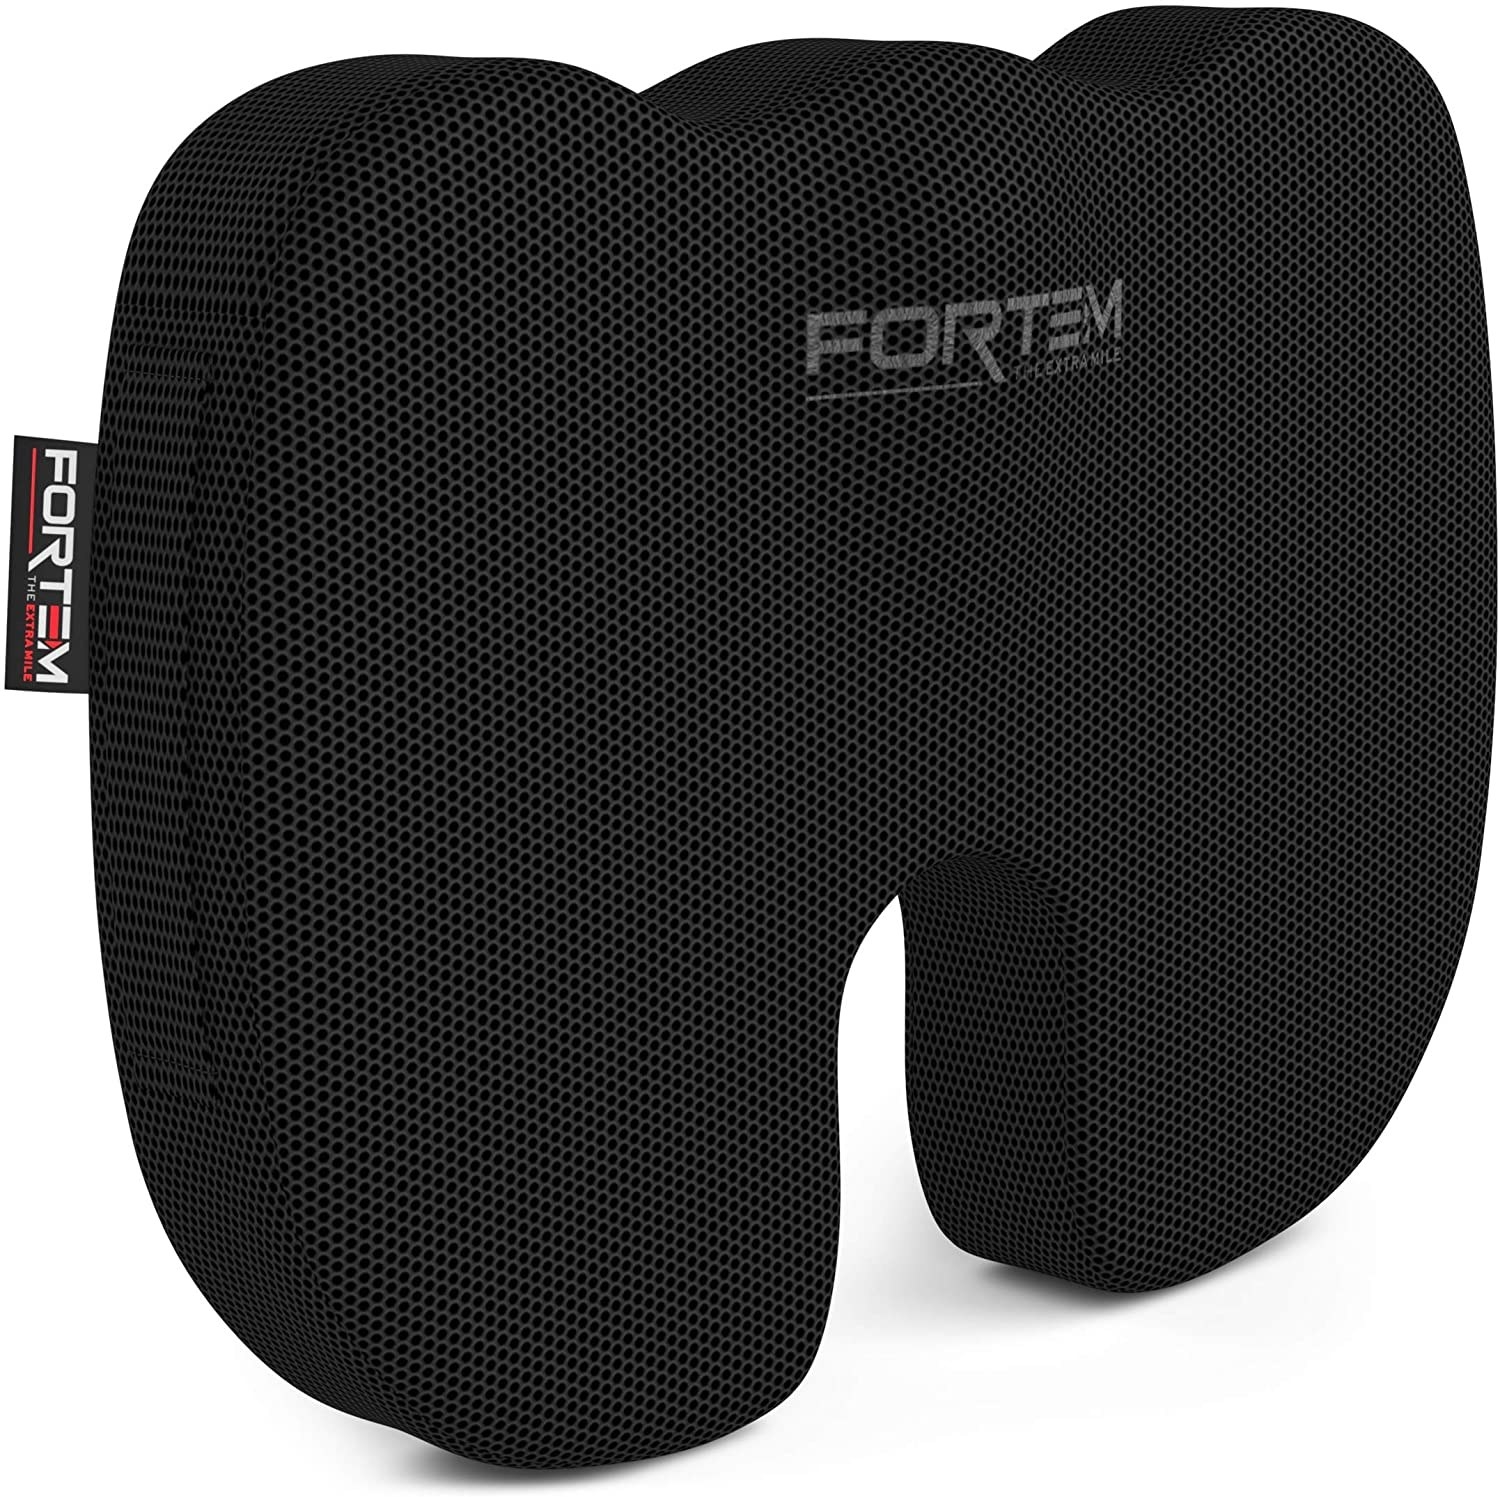 A thick soft seat cushion in a curved shape with a textured mesh cover